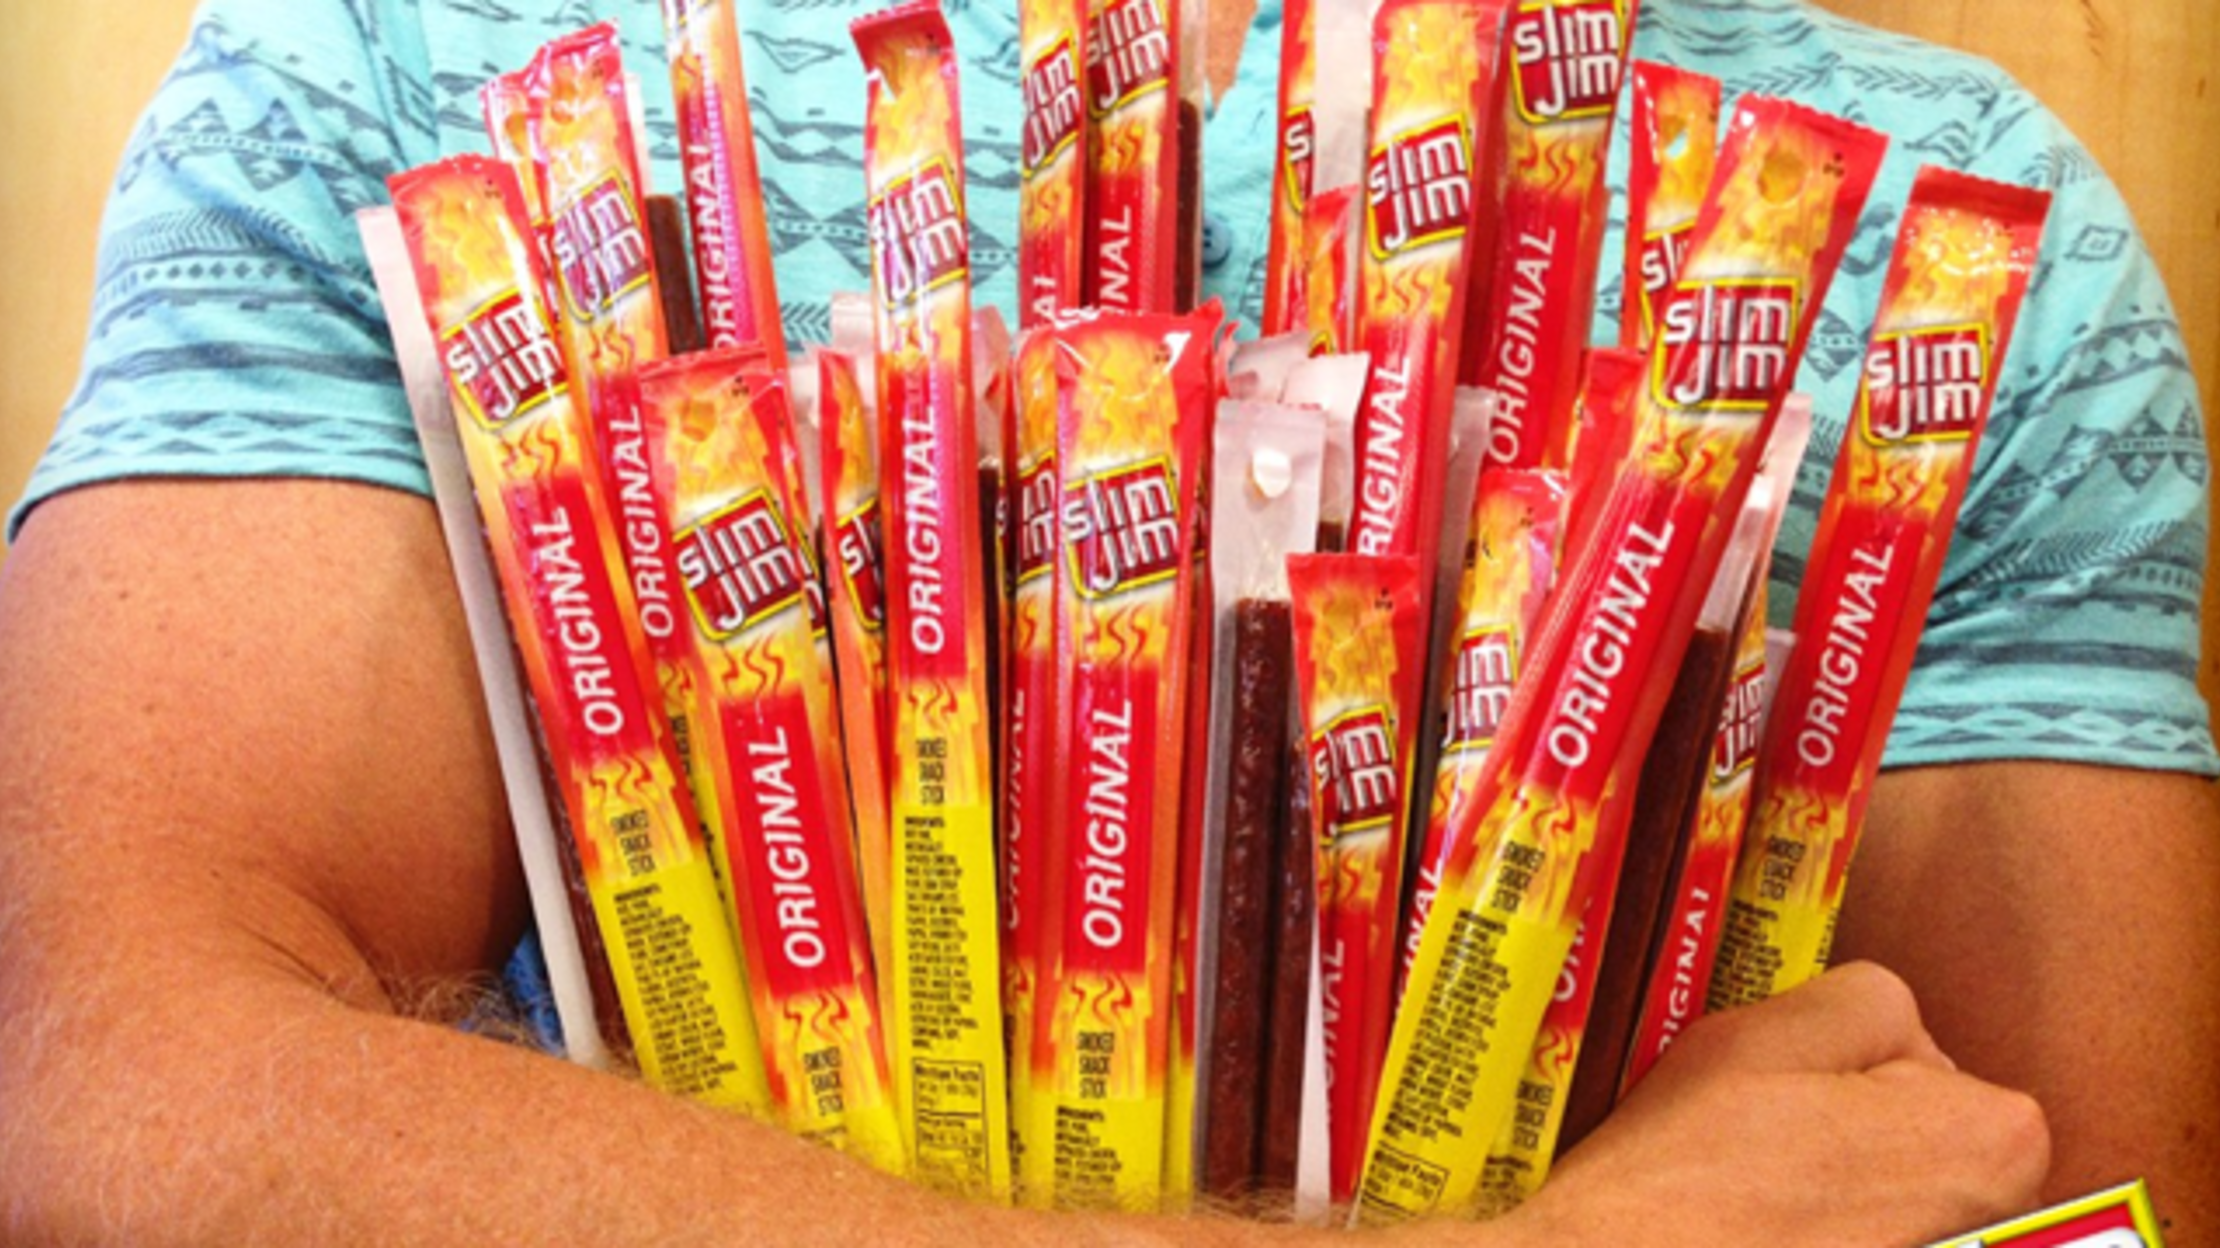 10 Snappy Facts About Slim Jim | Mental Floss